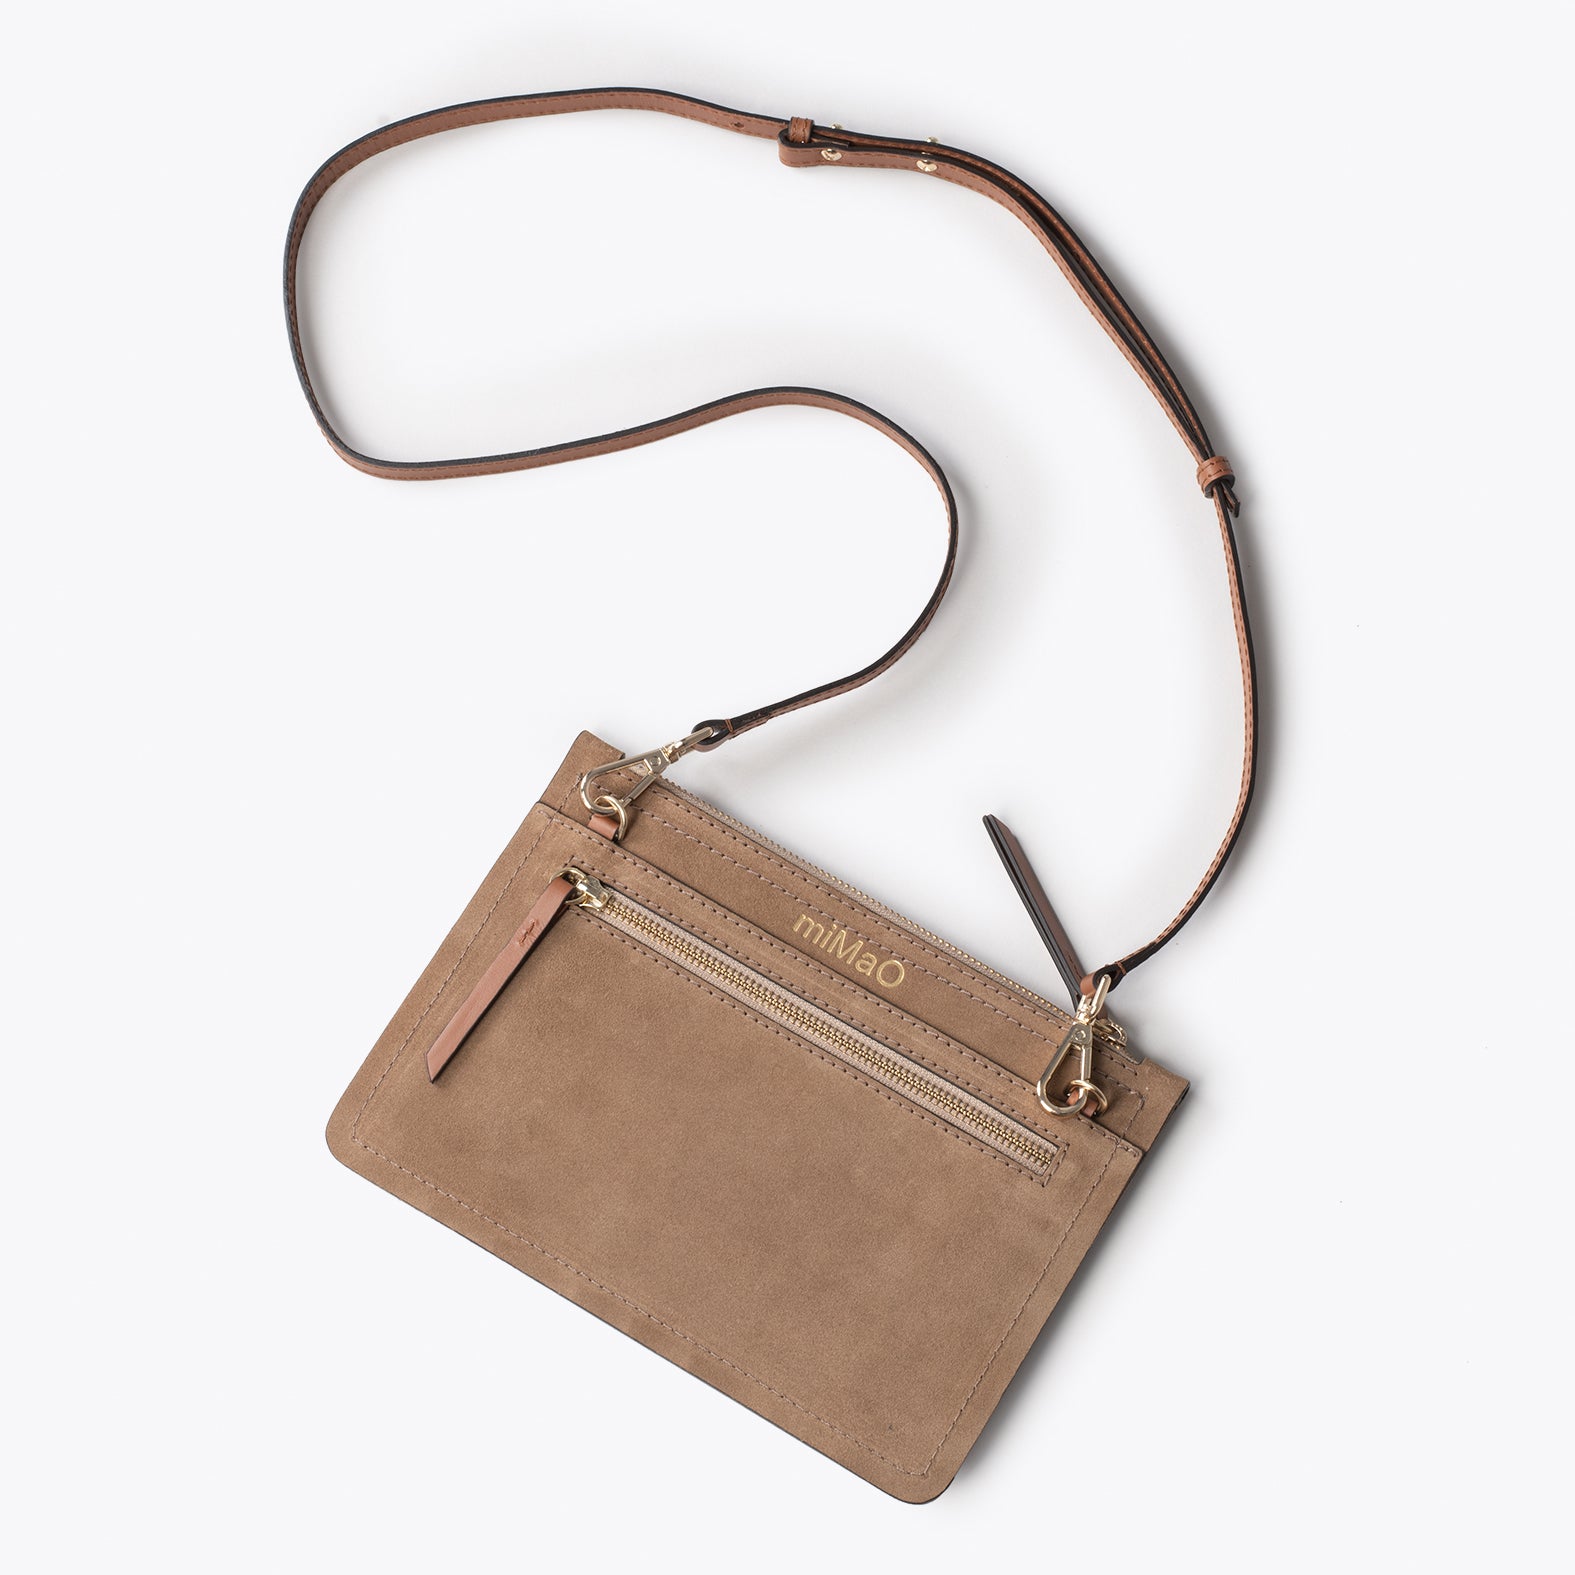 CLASSIC - TAUPE women's shoulder bag